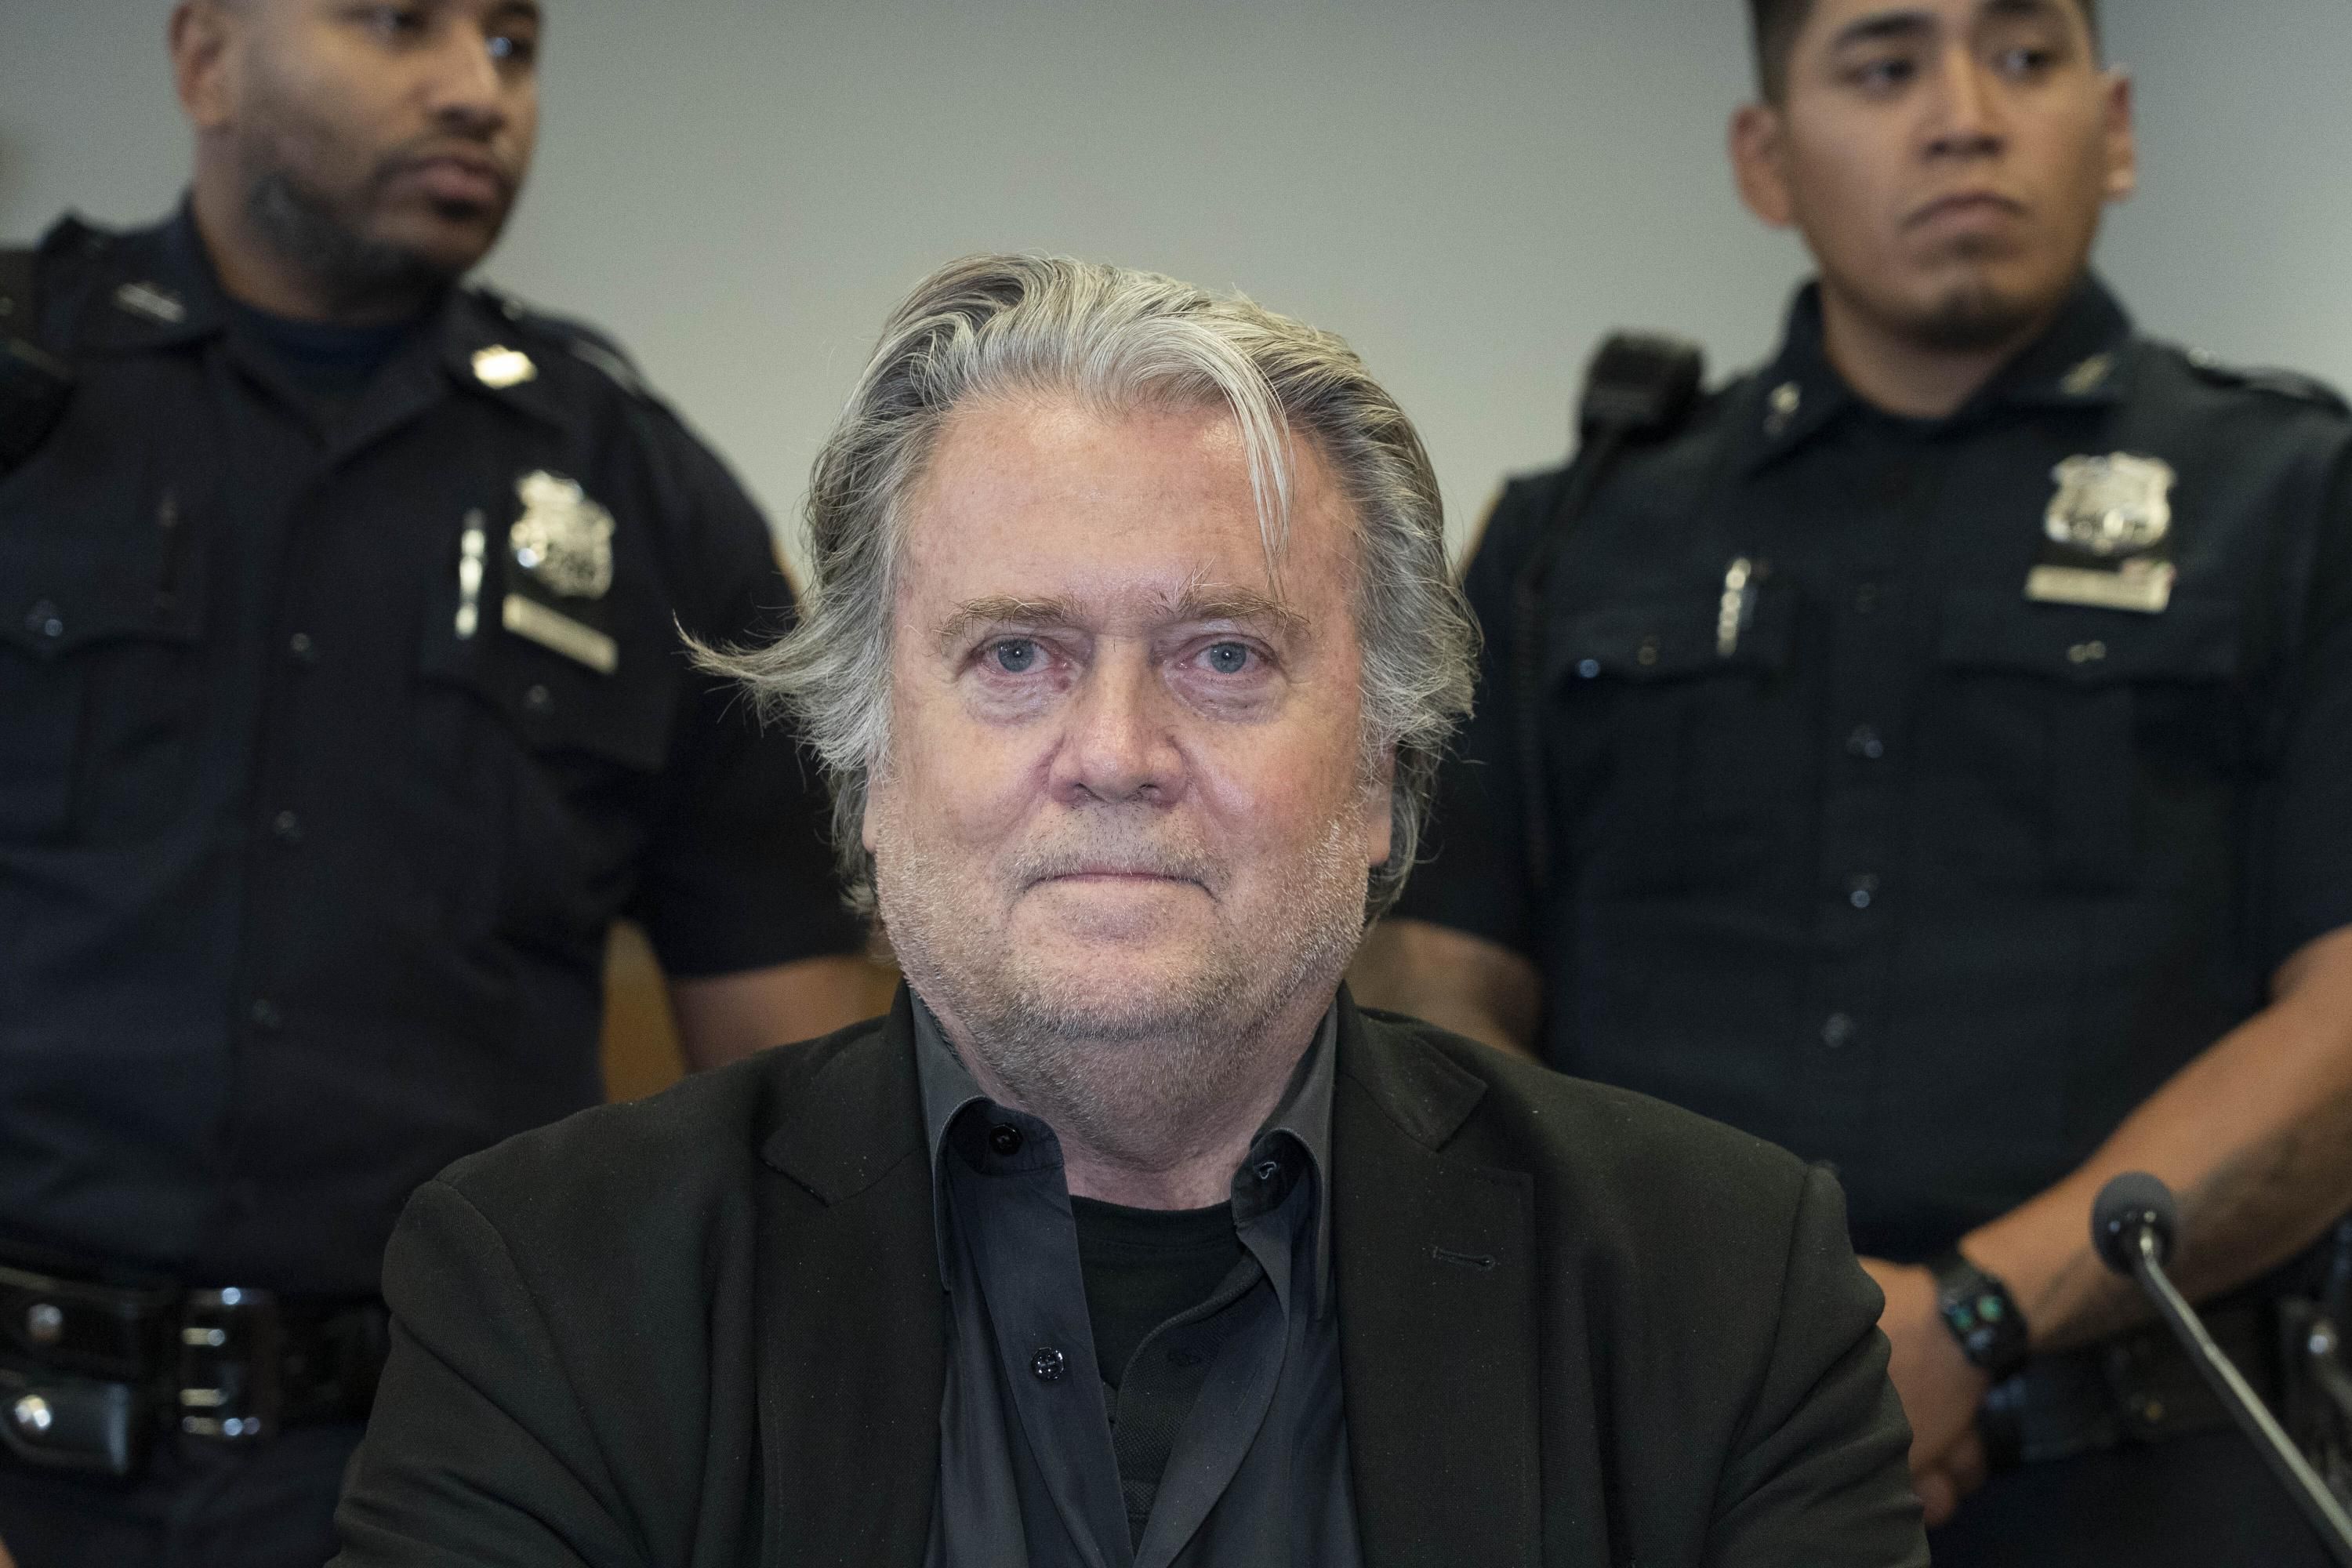 Former Trump aide Steve Bannon attends a court hearing